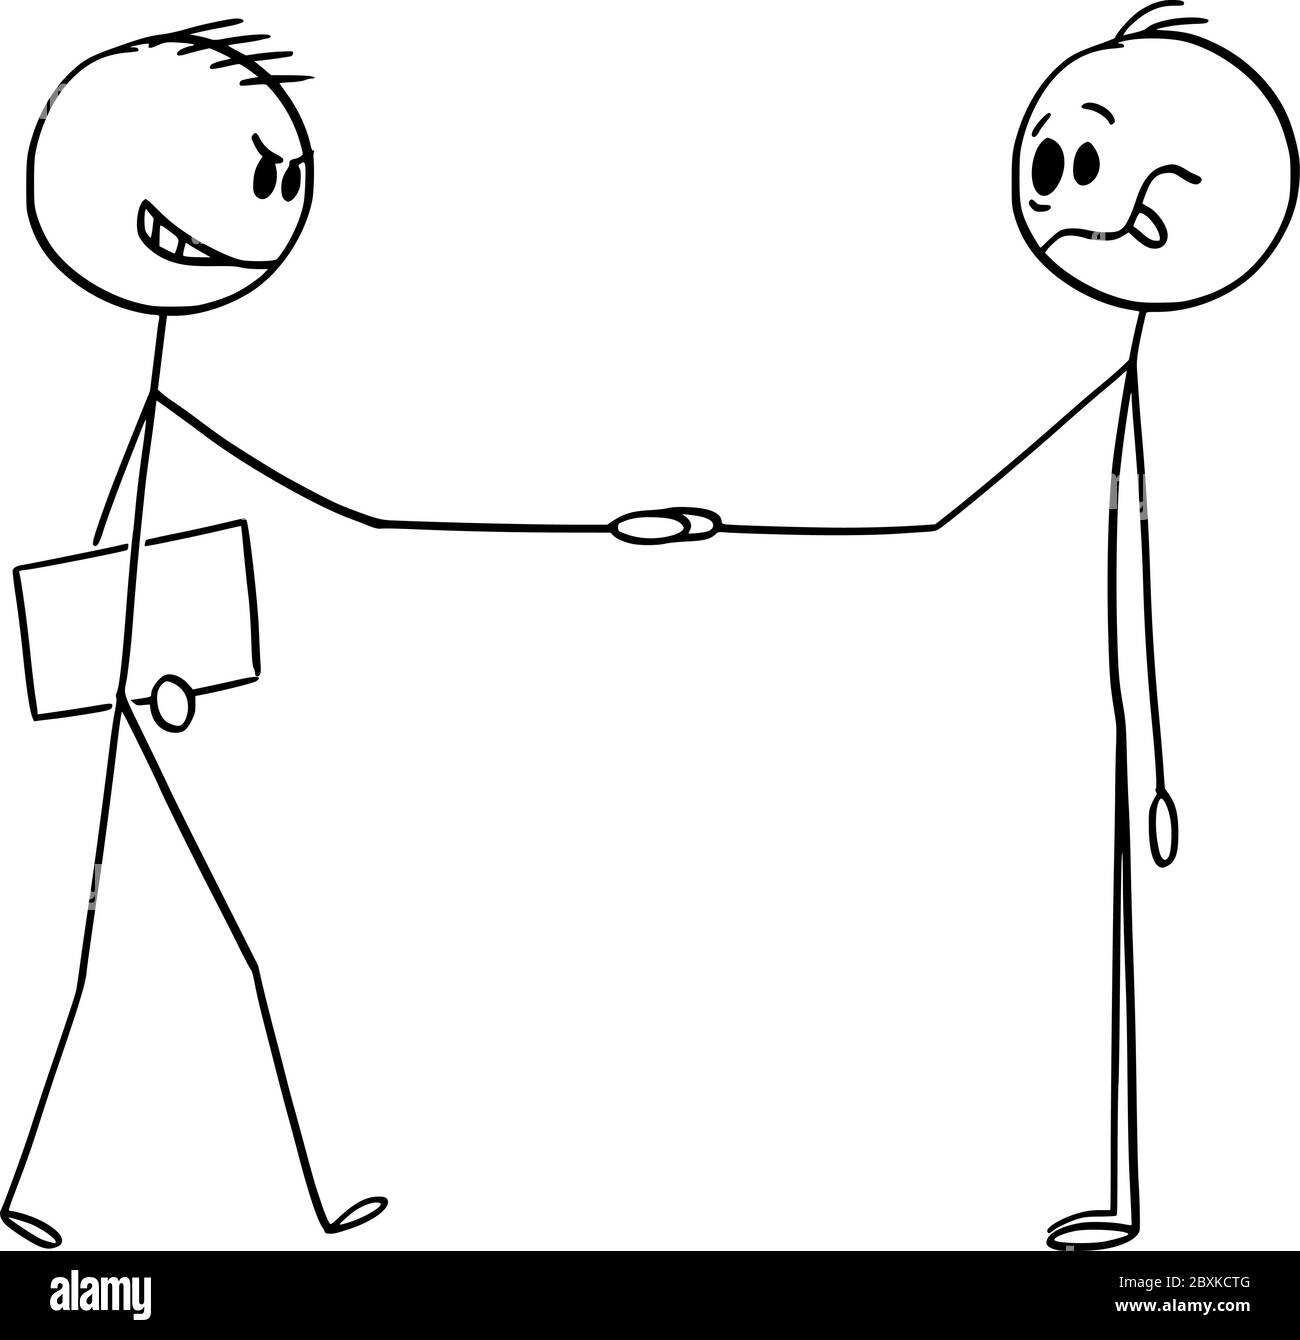 Vector cartoon stick figure drawing conceptual illustration of treacherous businessman,manager, recruiter or salesman shaking hands with stupid or naive man. Stock Vector